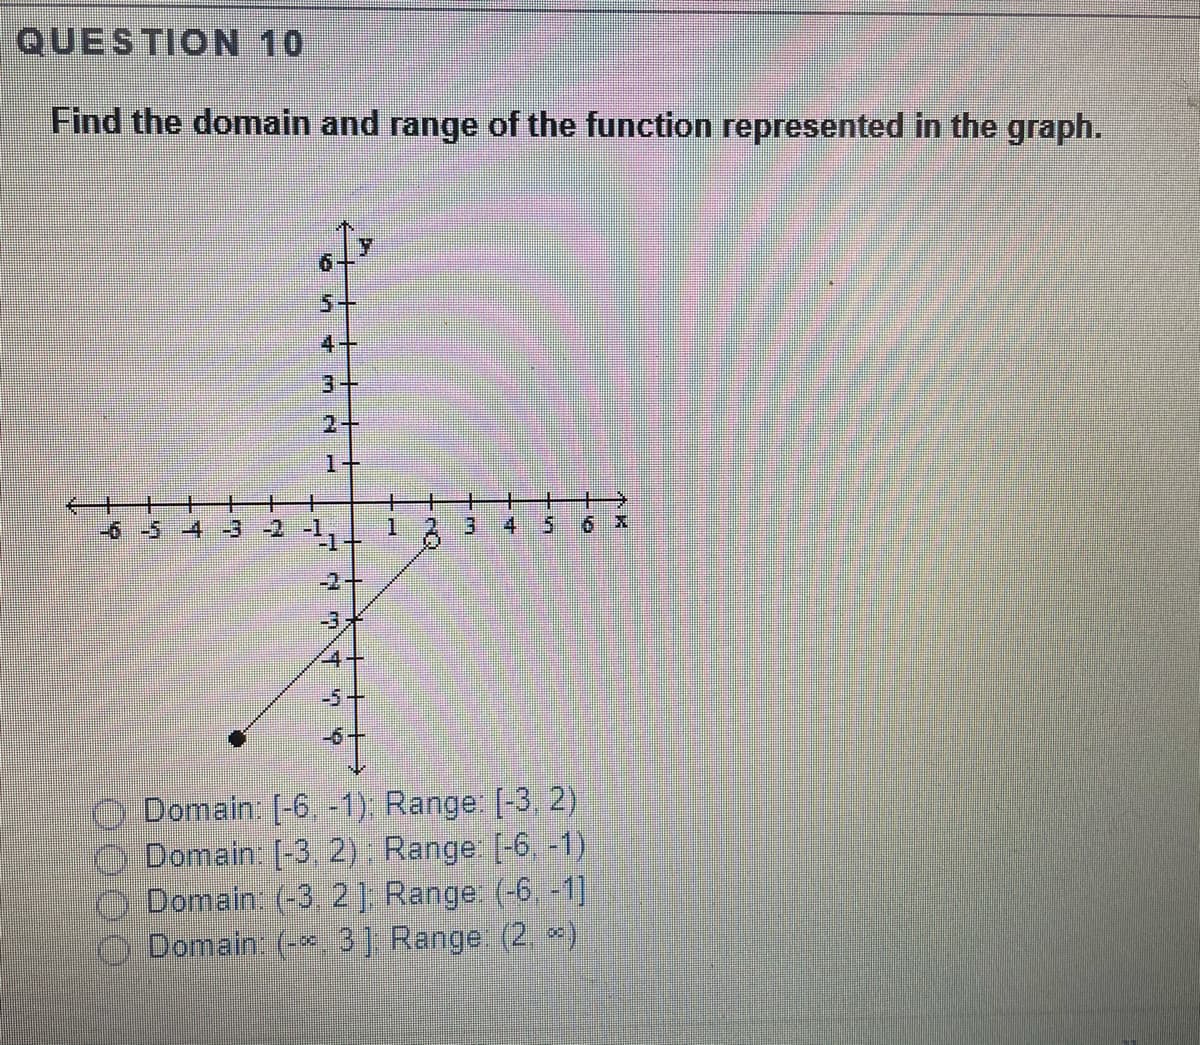 QUESTION 10
Find the domain and range of the function represented in the graph.
6.
5-
4+
3-
2+
十
十
-6-5-4 -3-2 -1
1.
-2+
-3才
4+
-5+
-6-
Domain: [-6, -1), Range: [-3, 2)
Domain: [-3, 2) Range [-6, -1)
Domain. (-3, 2 1 Range (-6, -1]
Domain: (-*. 3] Range (2, )
